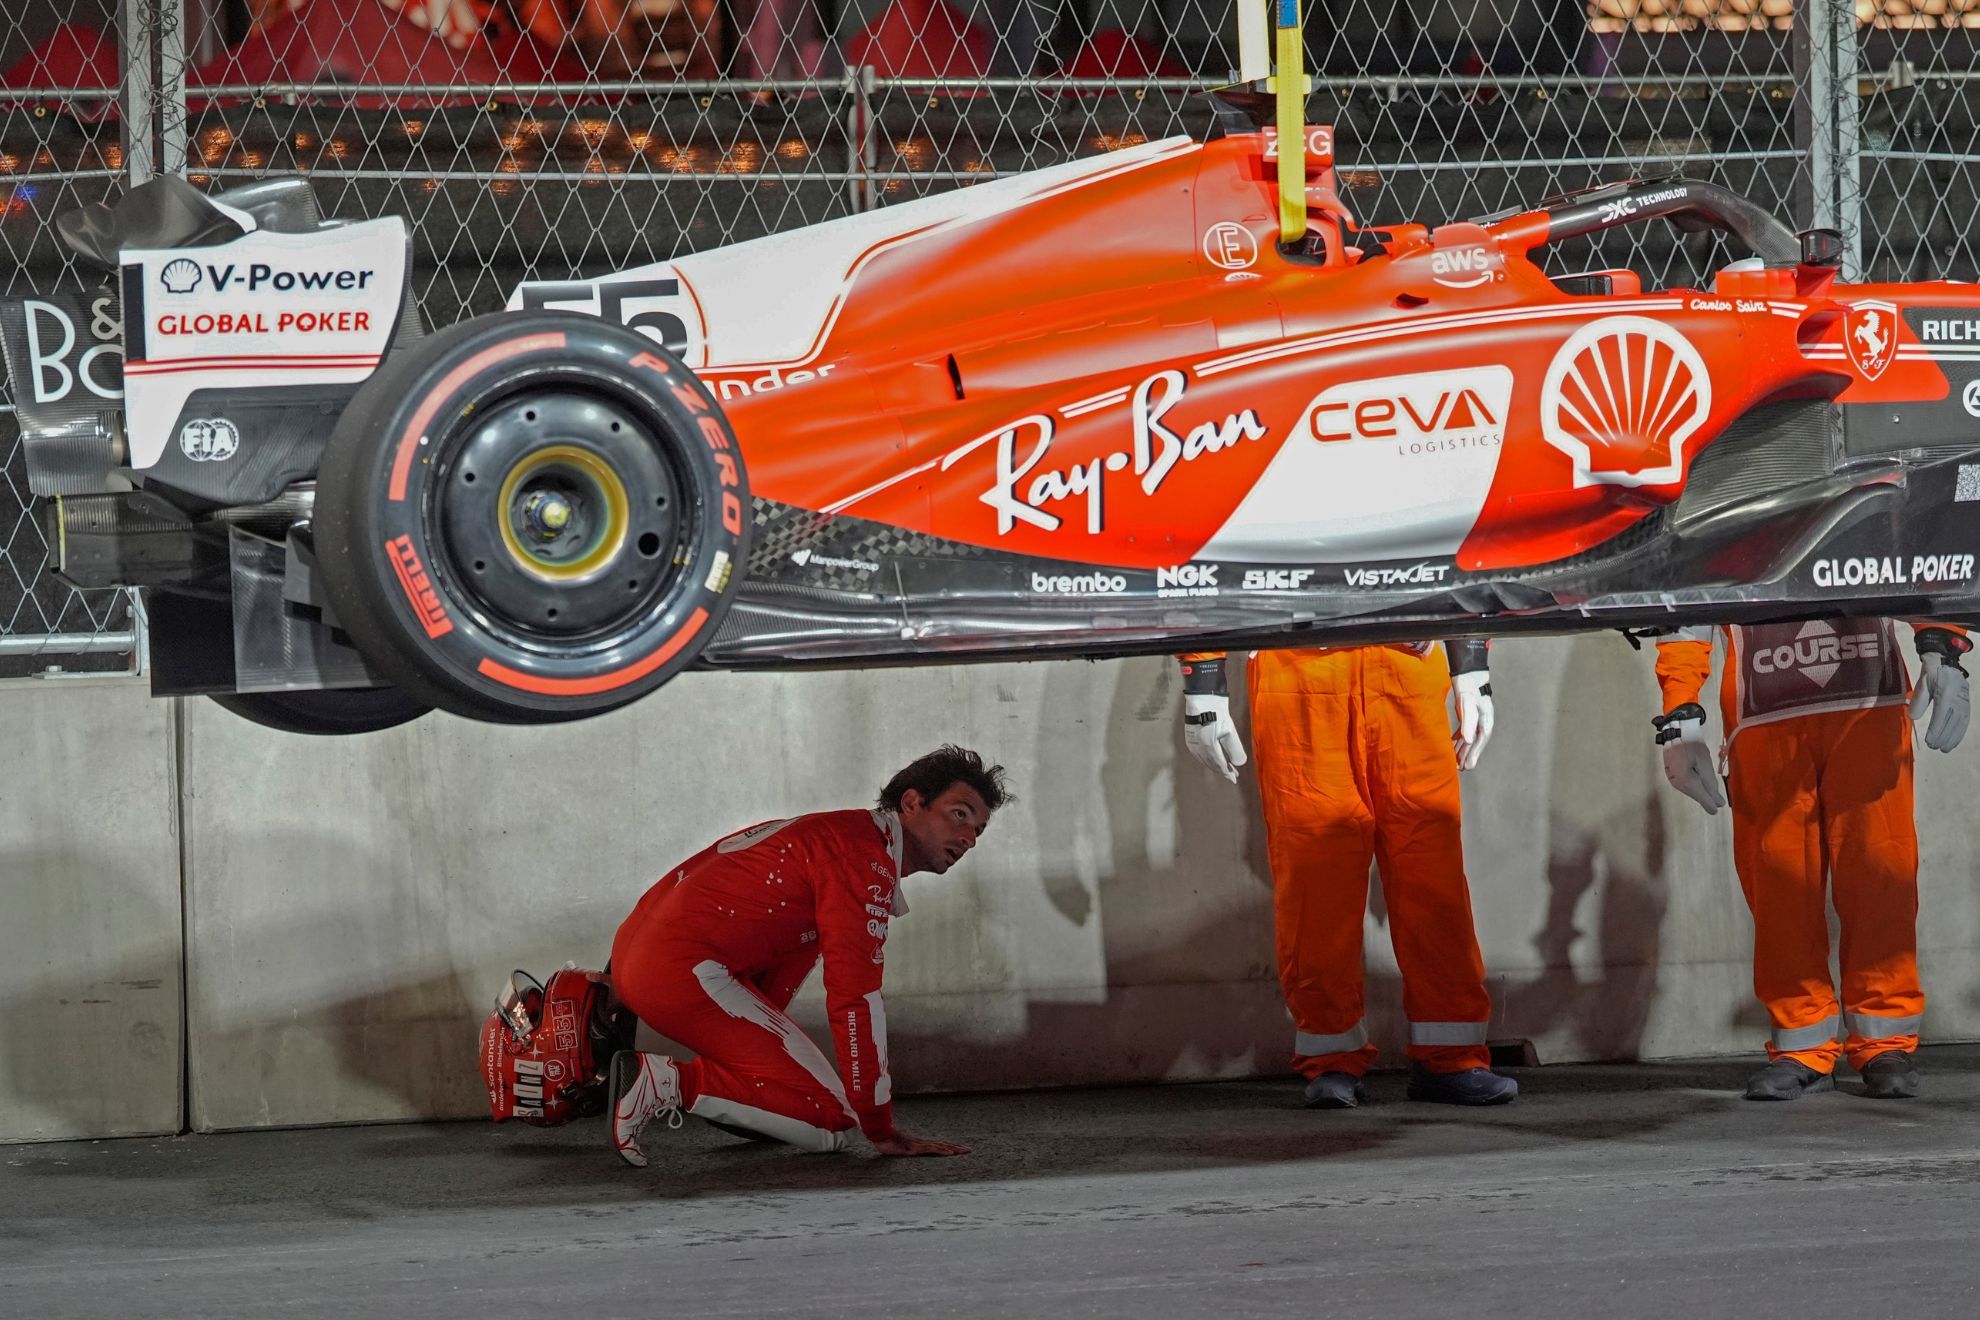 Ferrari damaged, fans told to leave as F1 gets off to rough Las Vegas GP start